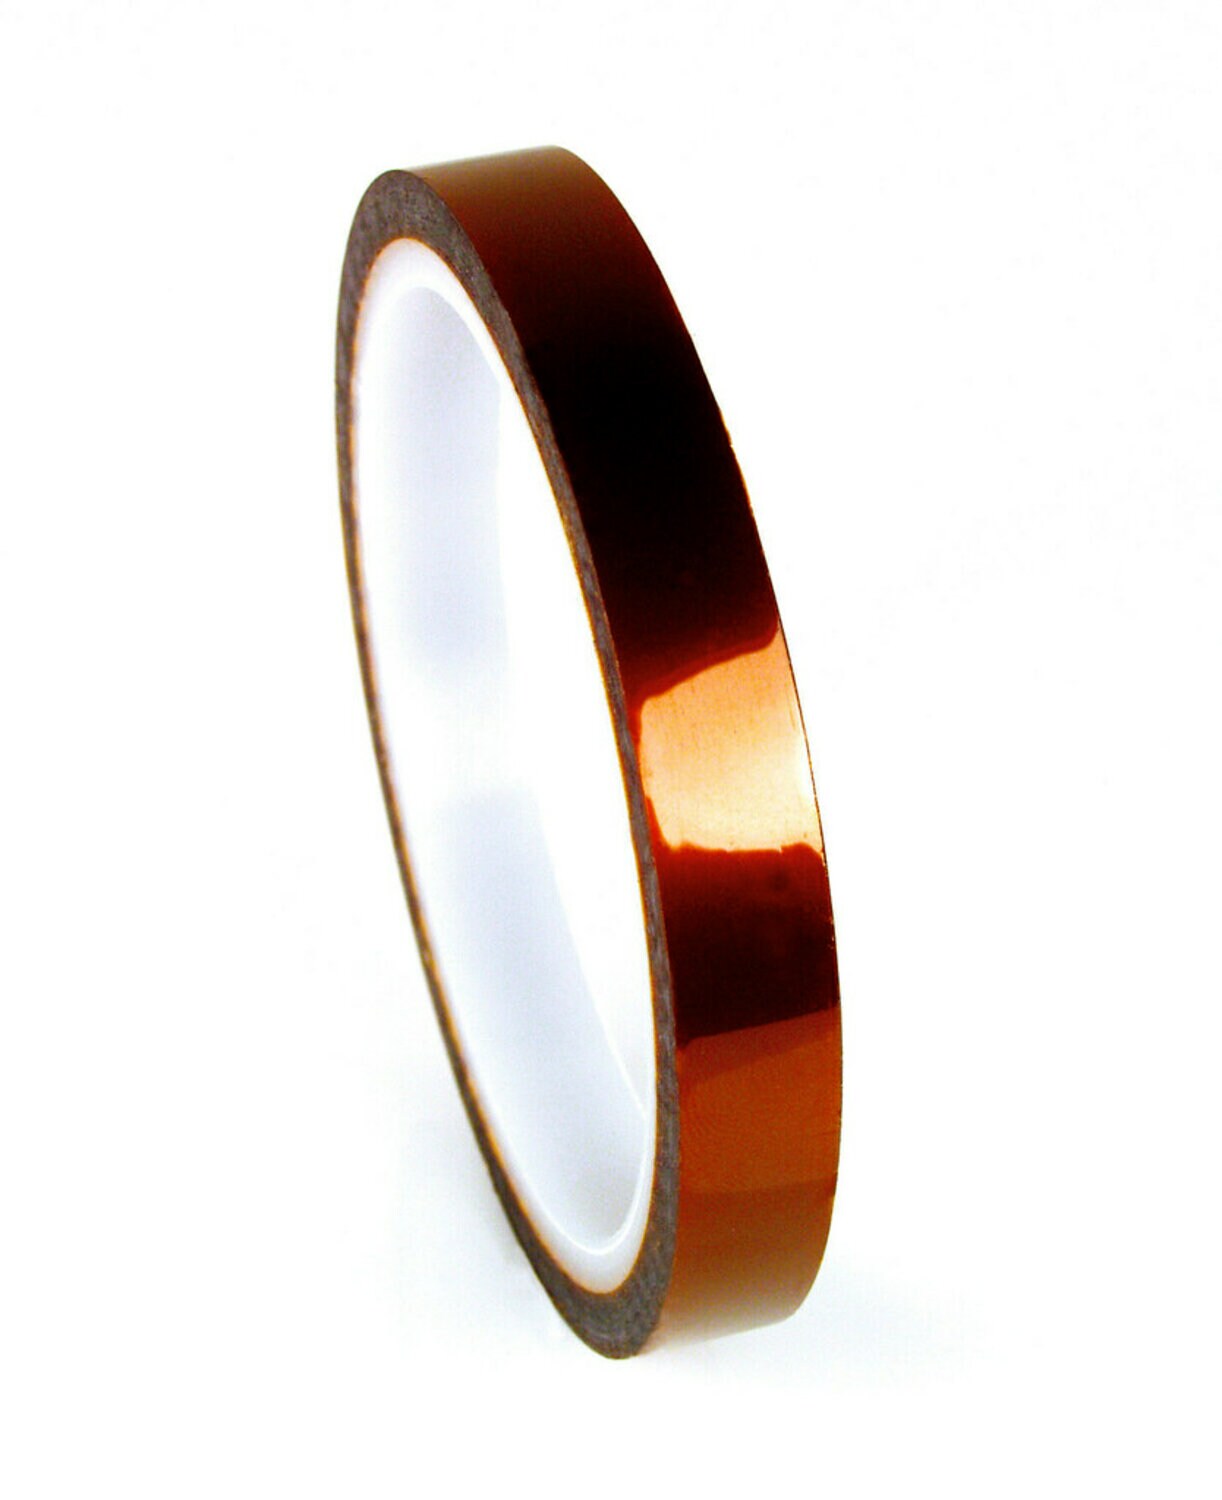 7000132650 - 3M Polyimide Film Electrical Tape 1205, Amber, Acrylic Adhesive, 1 mil
film, 3/8 in x 36 yd (9,52 mm x 33 m), 24/Case